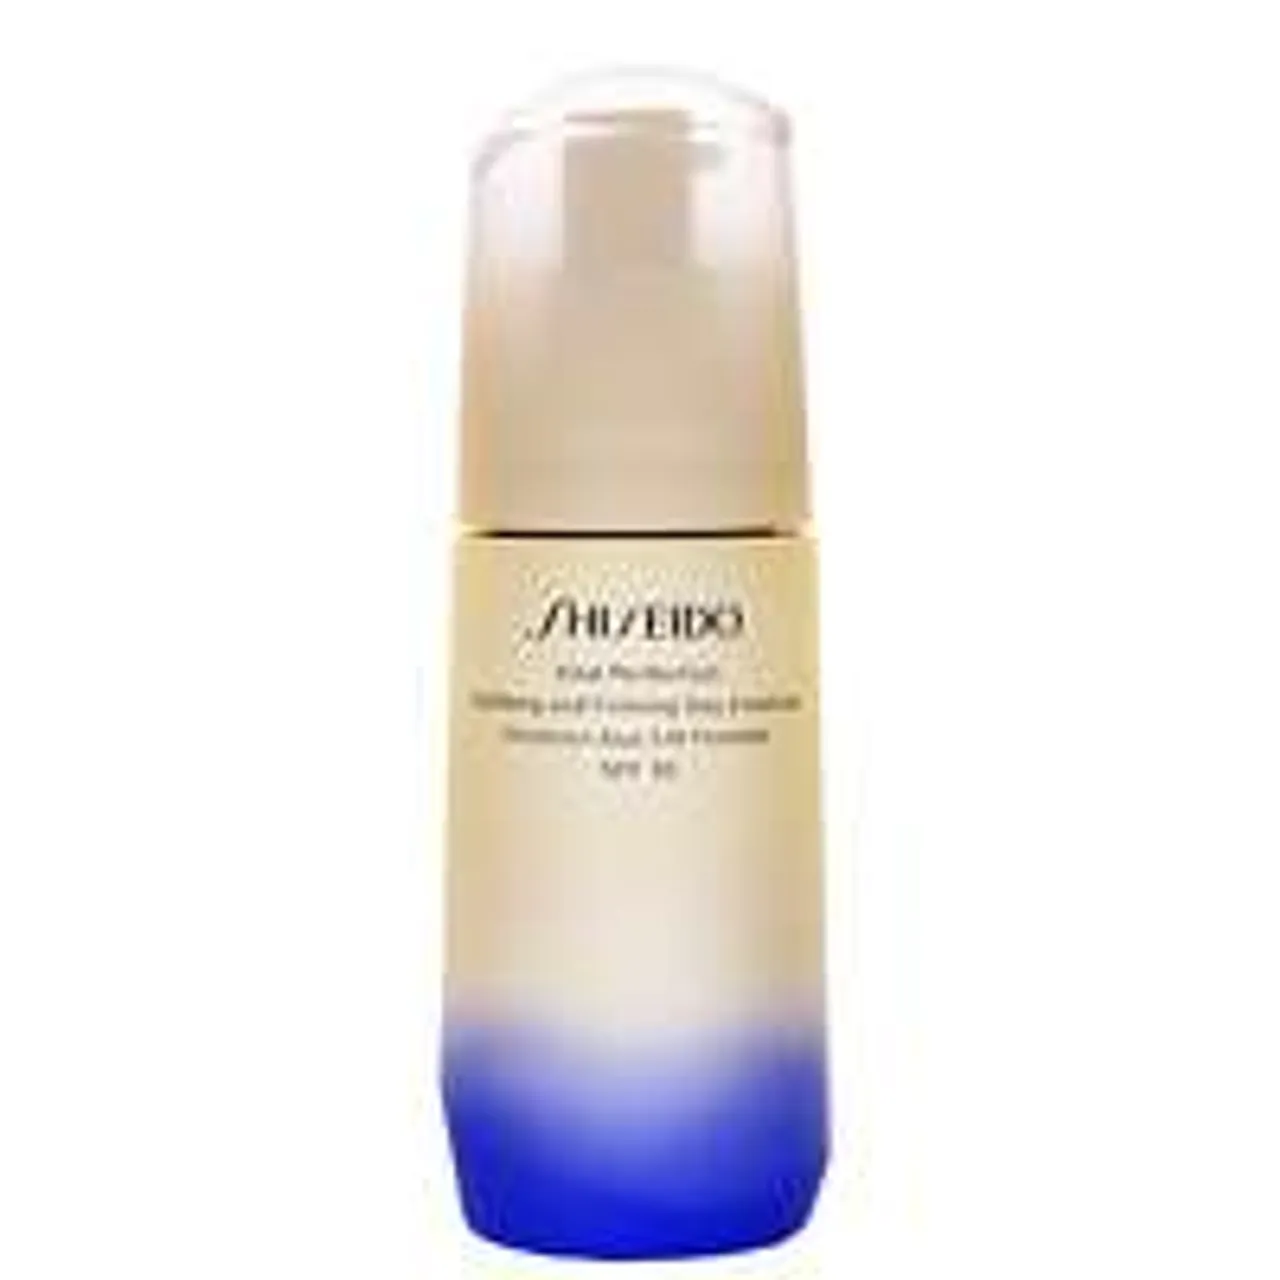 Shiseido Day And Night Creams Vital-Perfection: Uplifting and Firming Day Emulsion SPF30 75ml / 2.5 fl.oz.